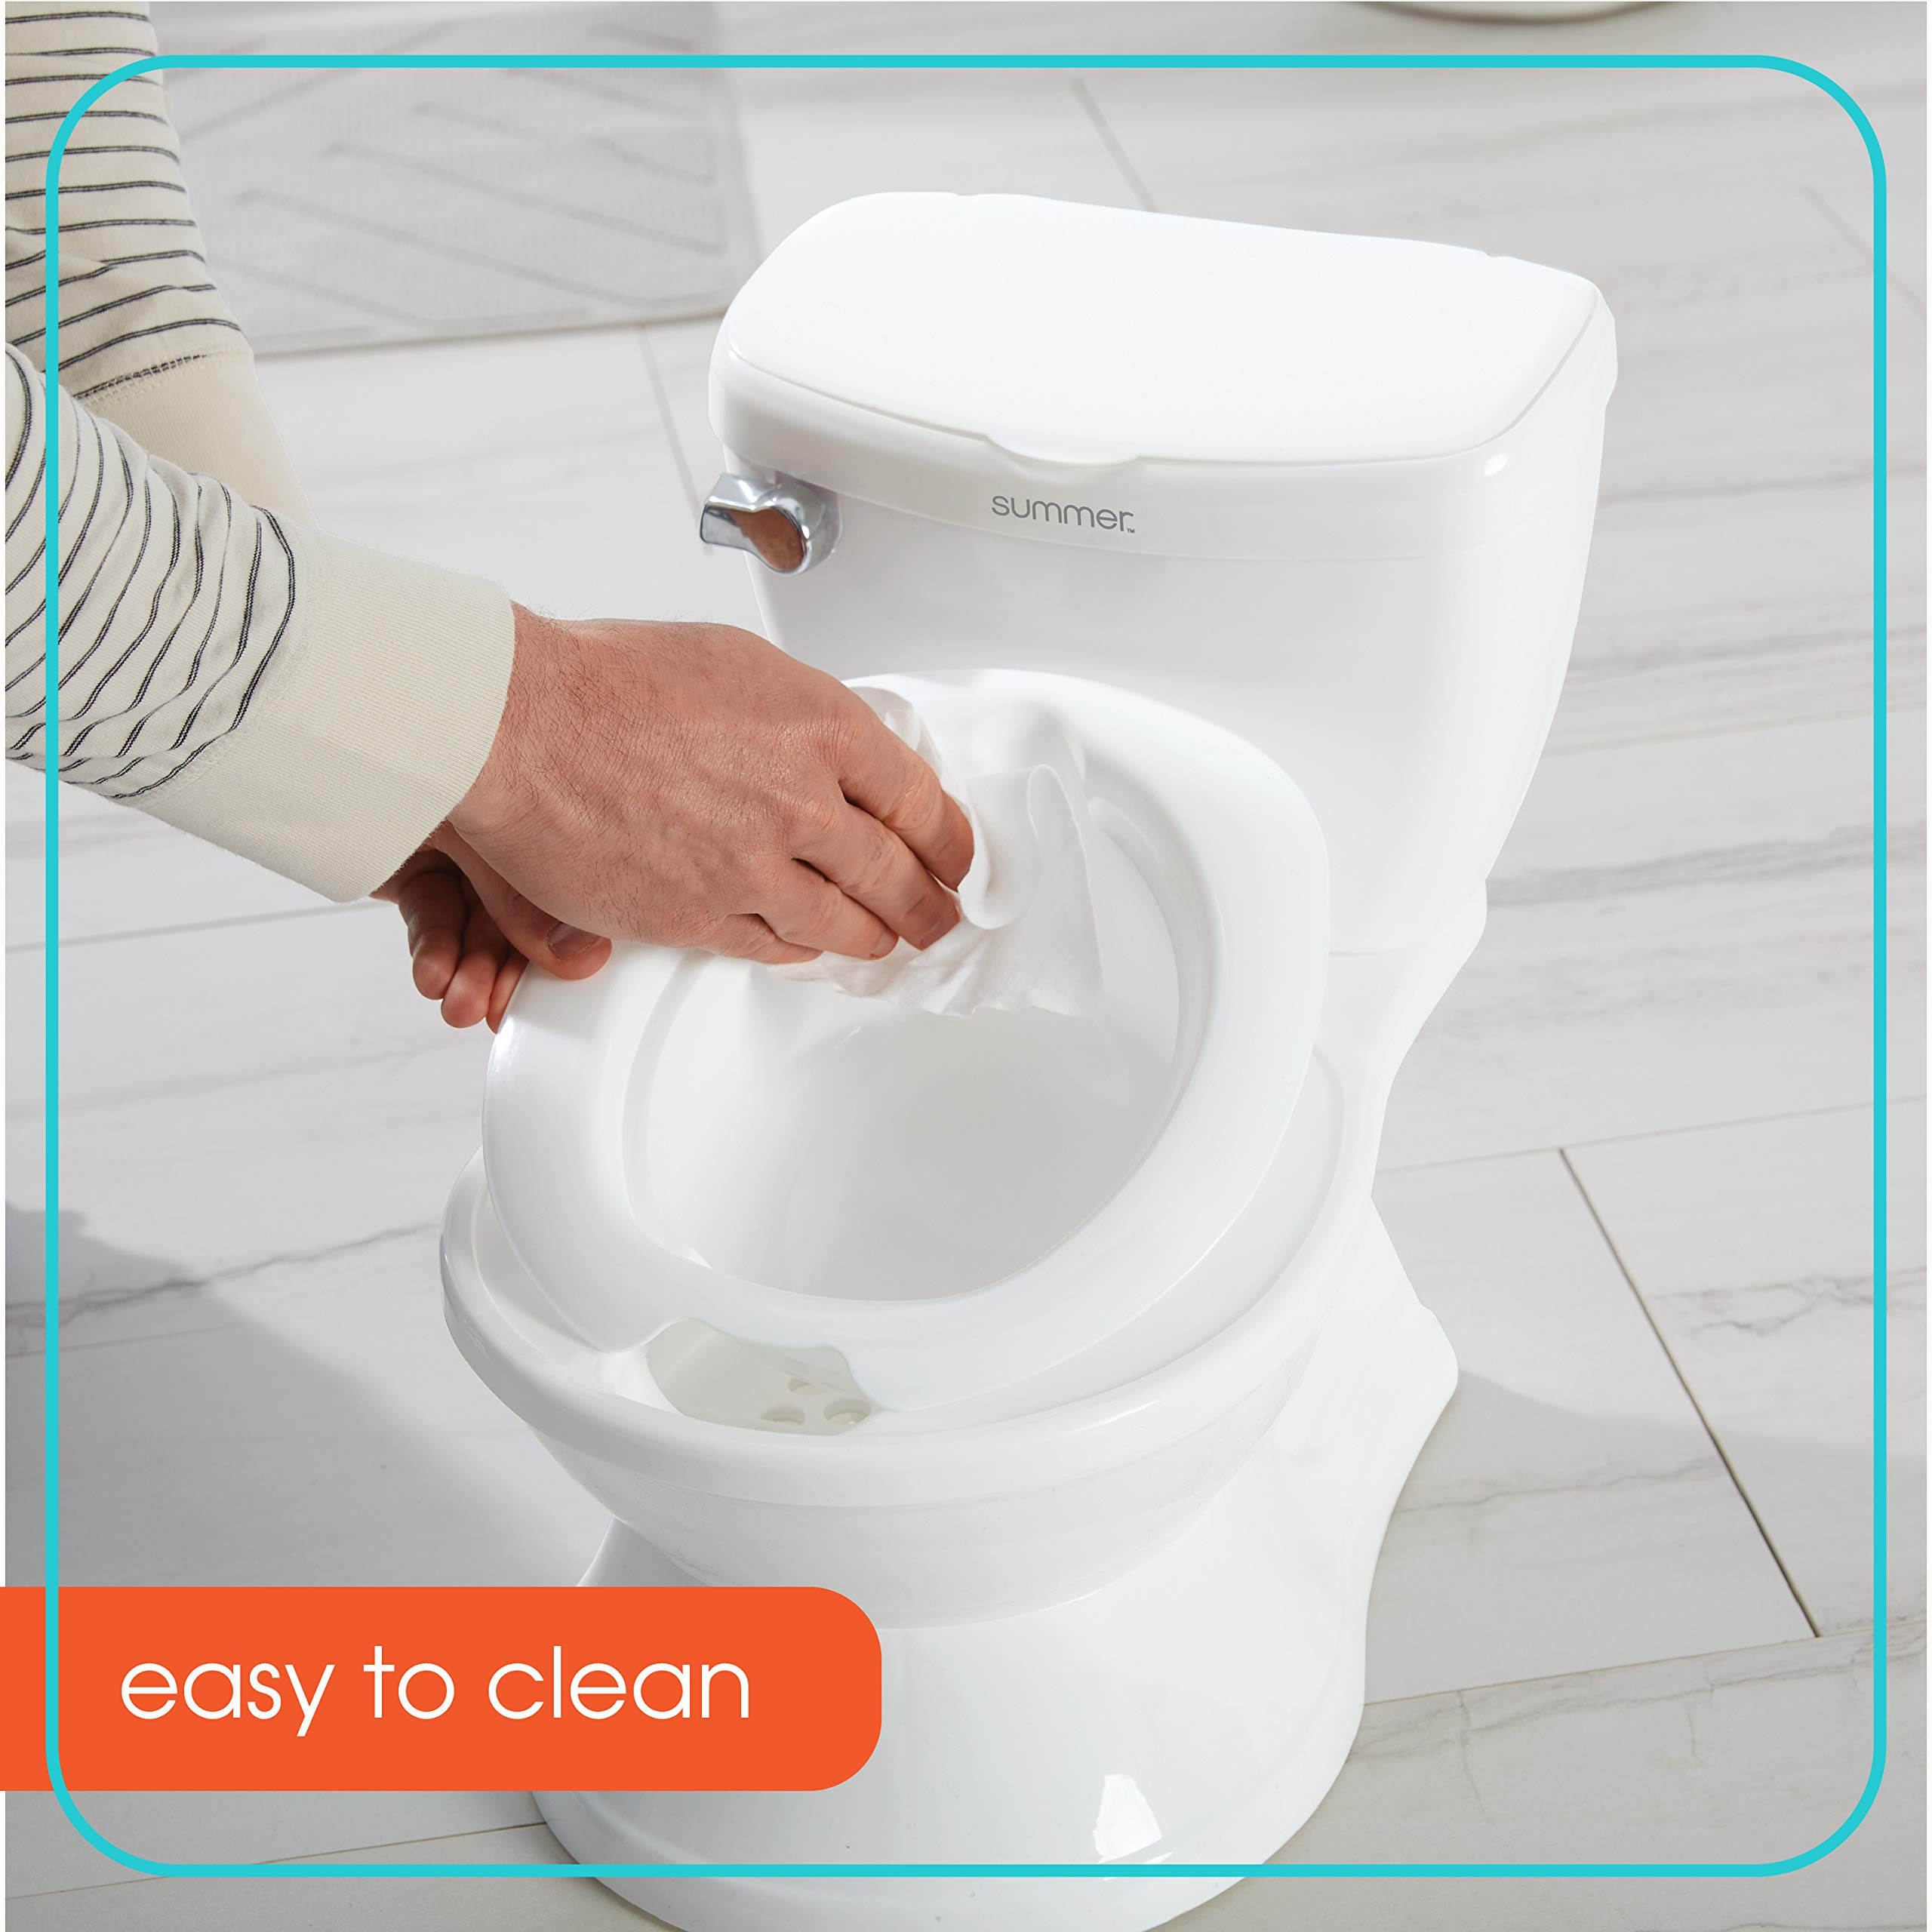 Summer My Size Potty with Transition Ring & Storage, White - Realistic Potty Training Toilet - Features Interactive Toilet Handle, Removable Potty Topper and Pot, Wipe Compartment, and Splash Guard